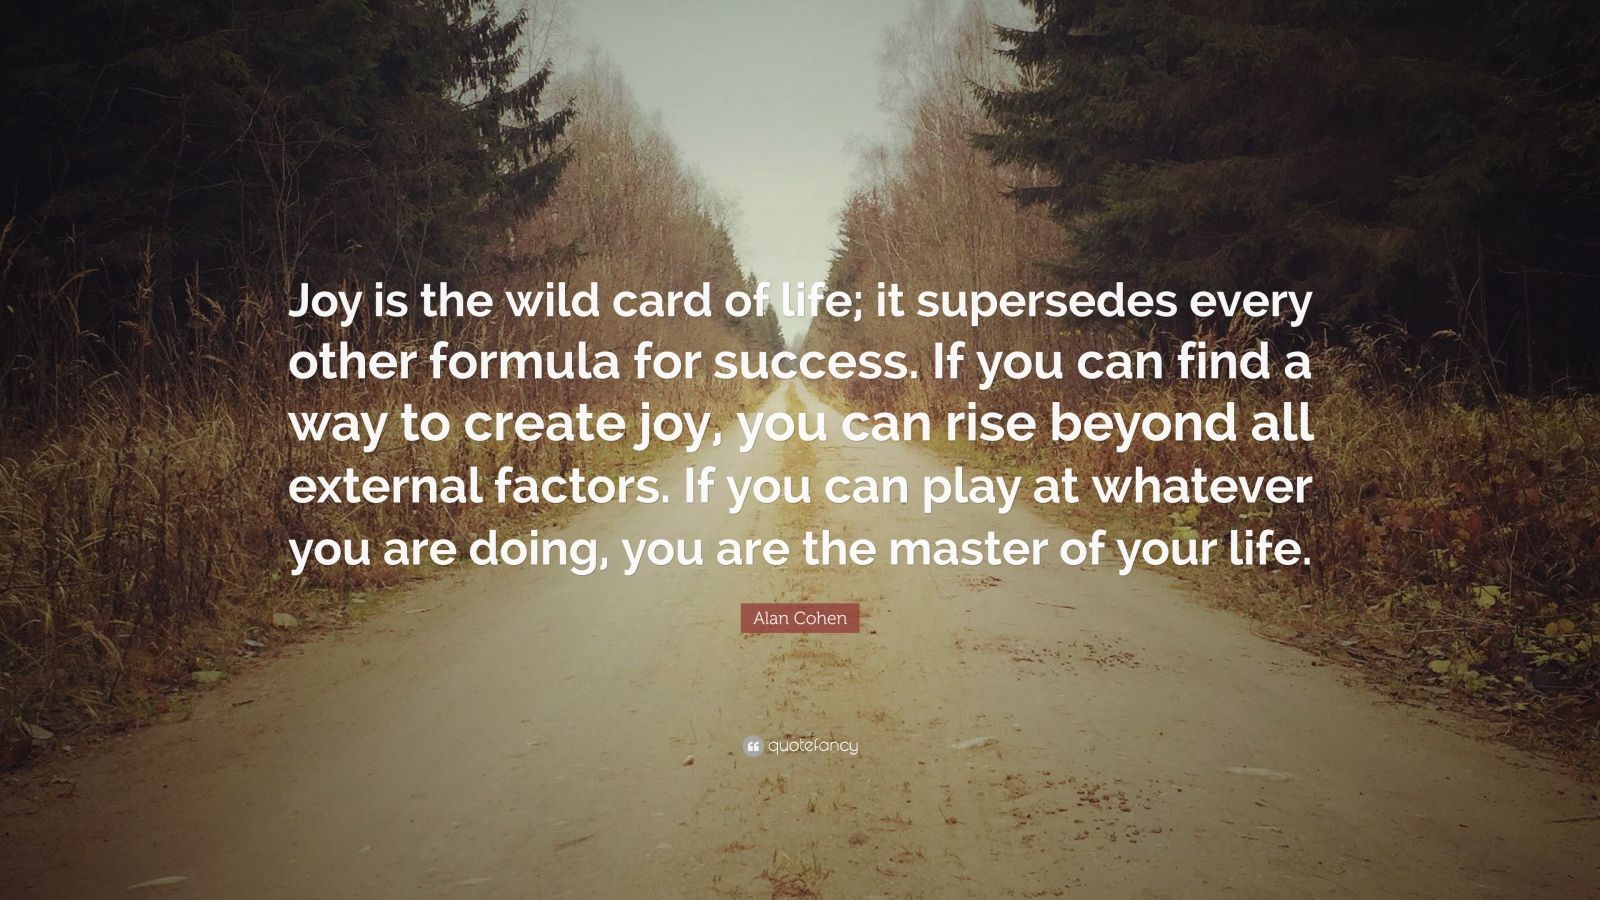 Alan Cohen Quote “Joy is the wild card of life; it